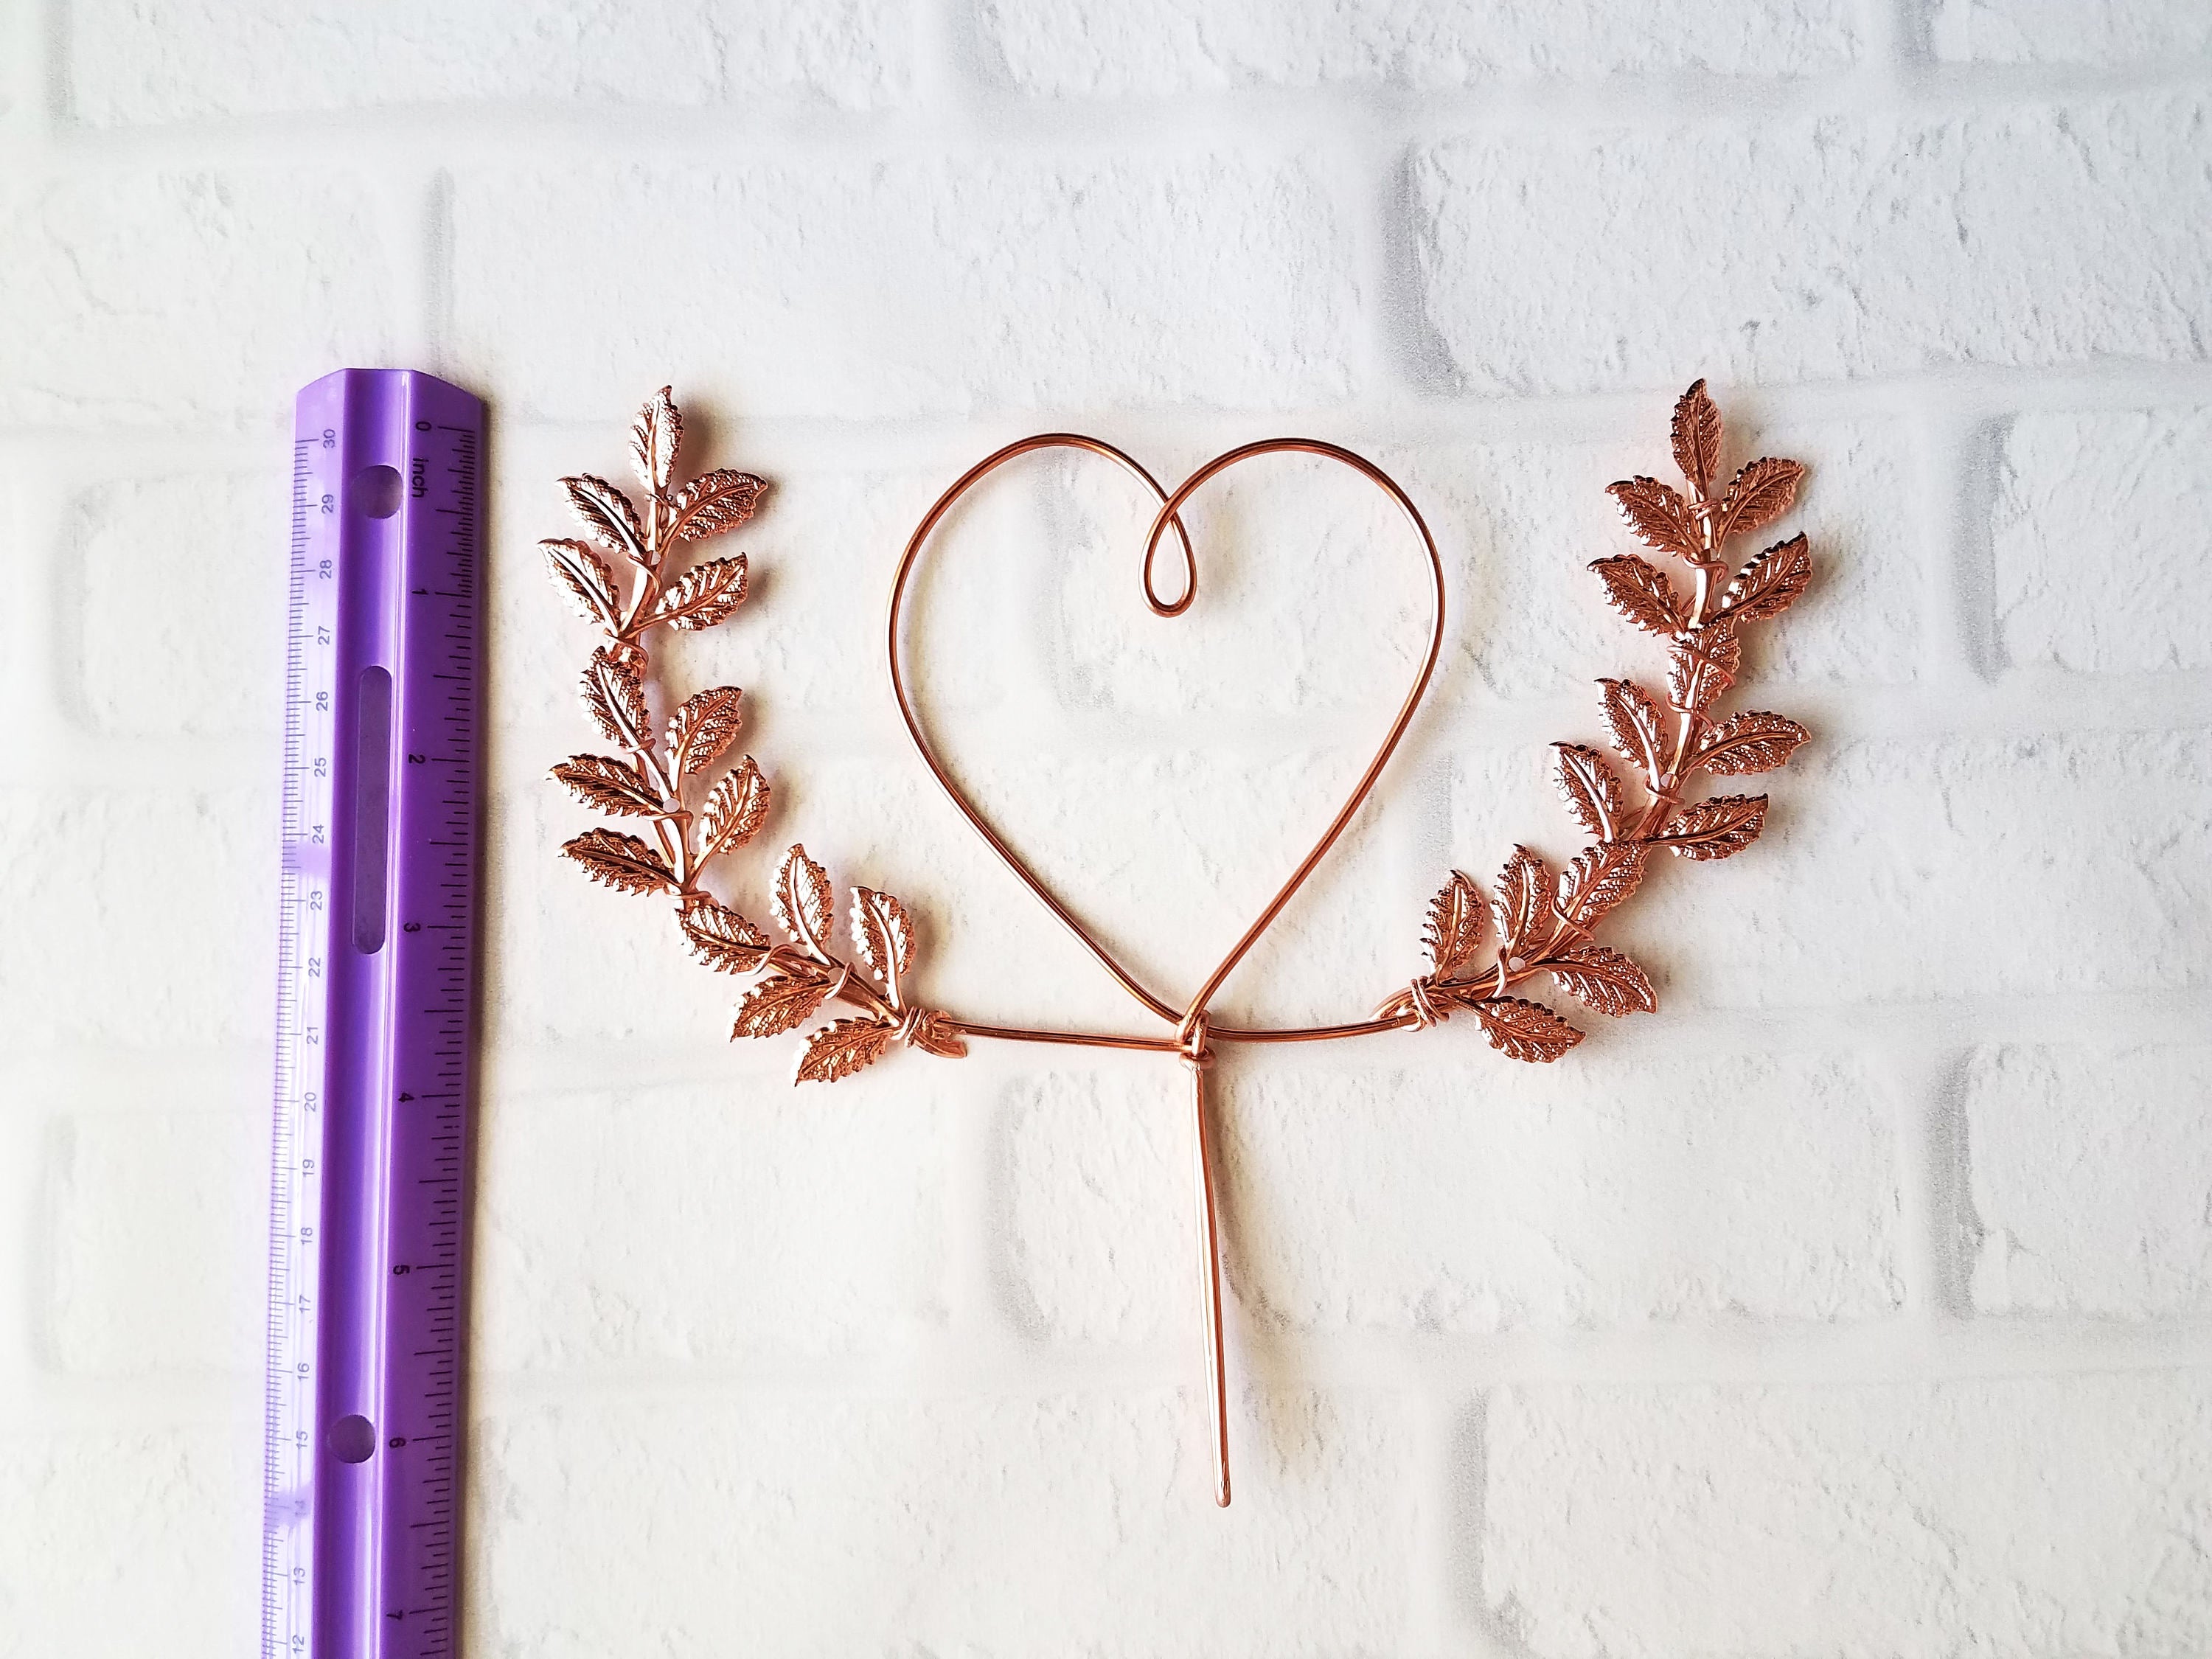 Heart with Laurel Wire Cake Topper